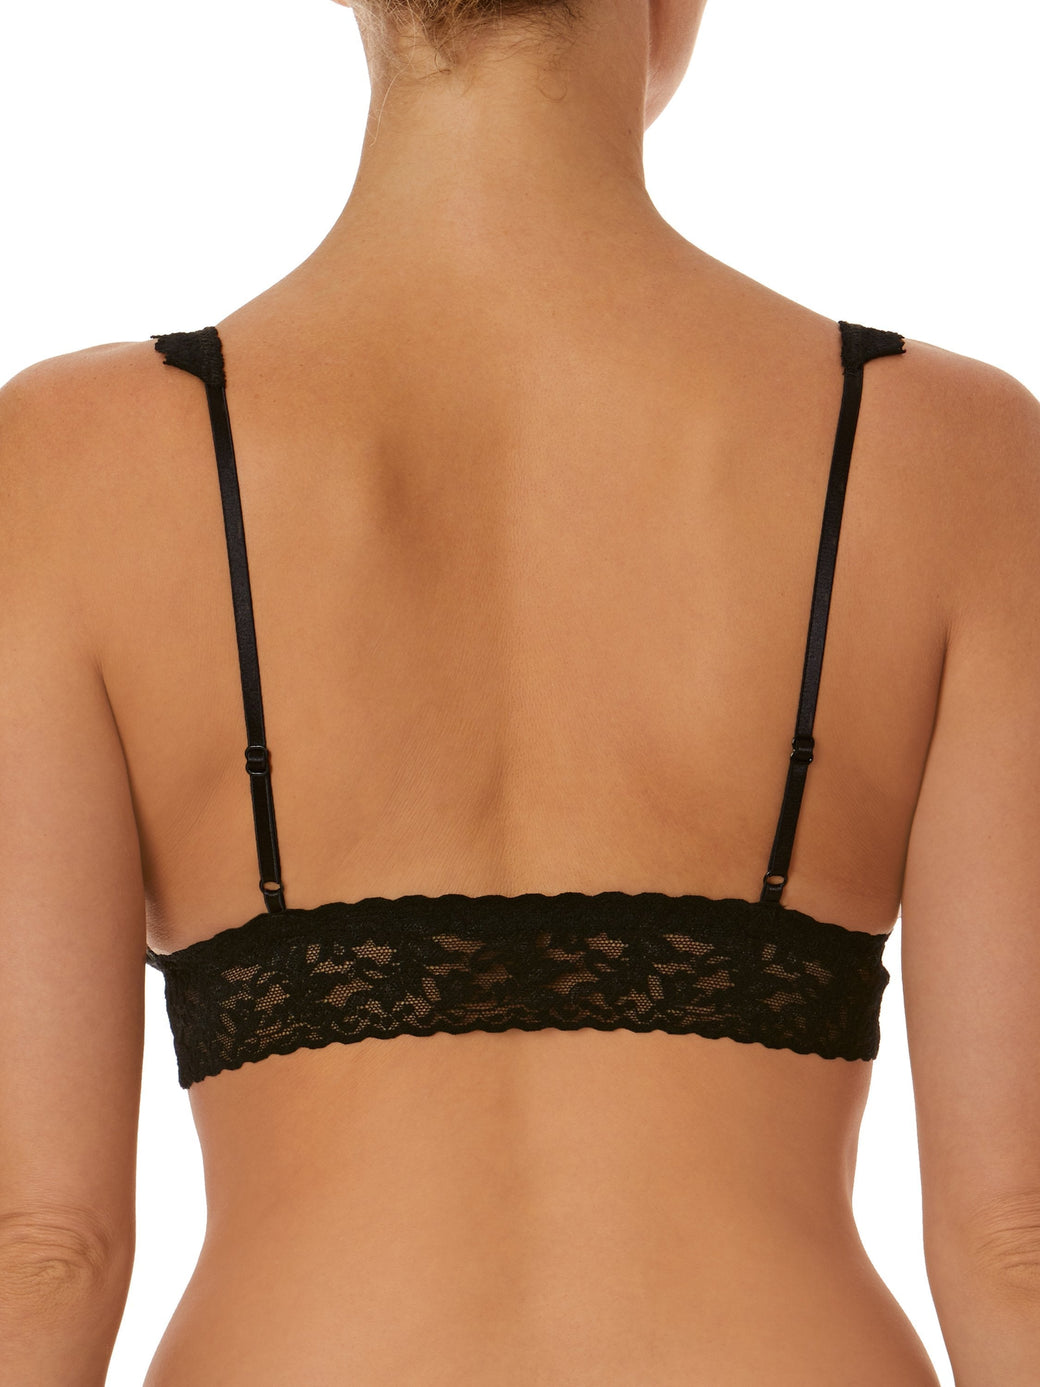 Hanky Panky Signature Lace Crossover Bralette In Stock At UK Tights